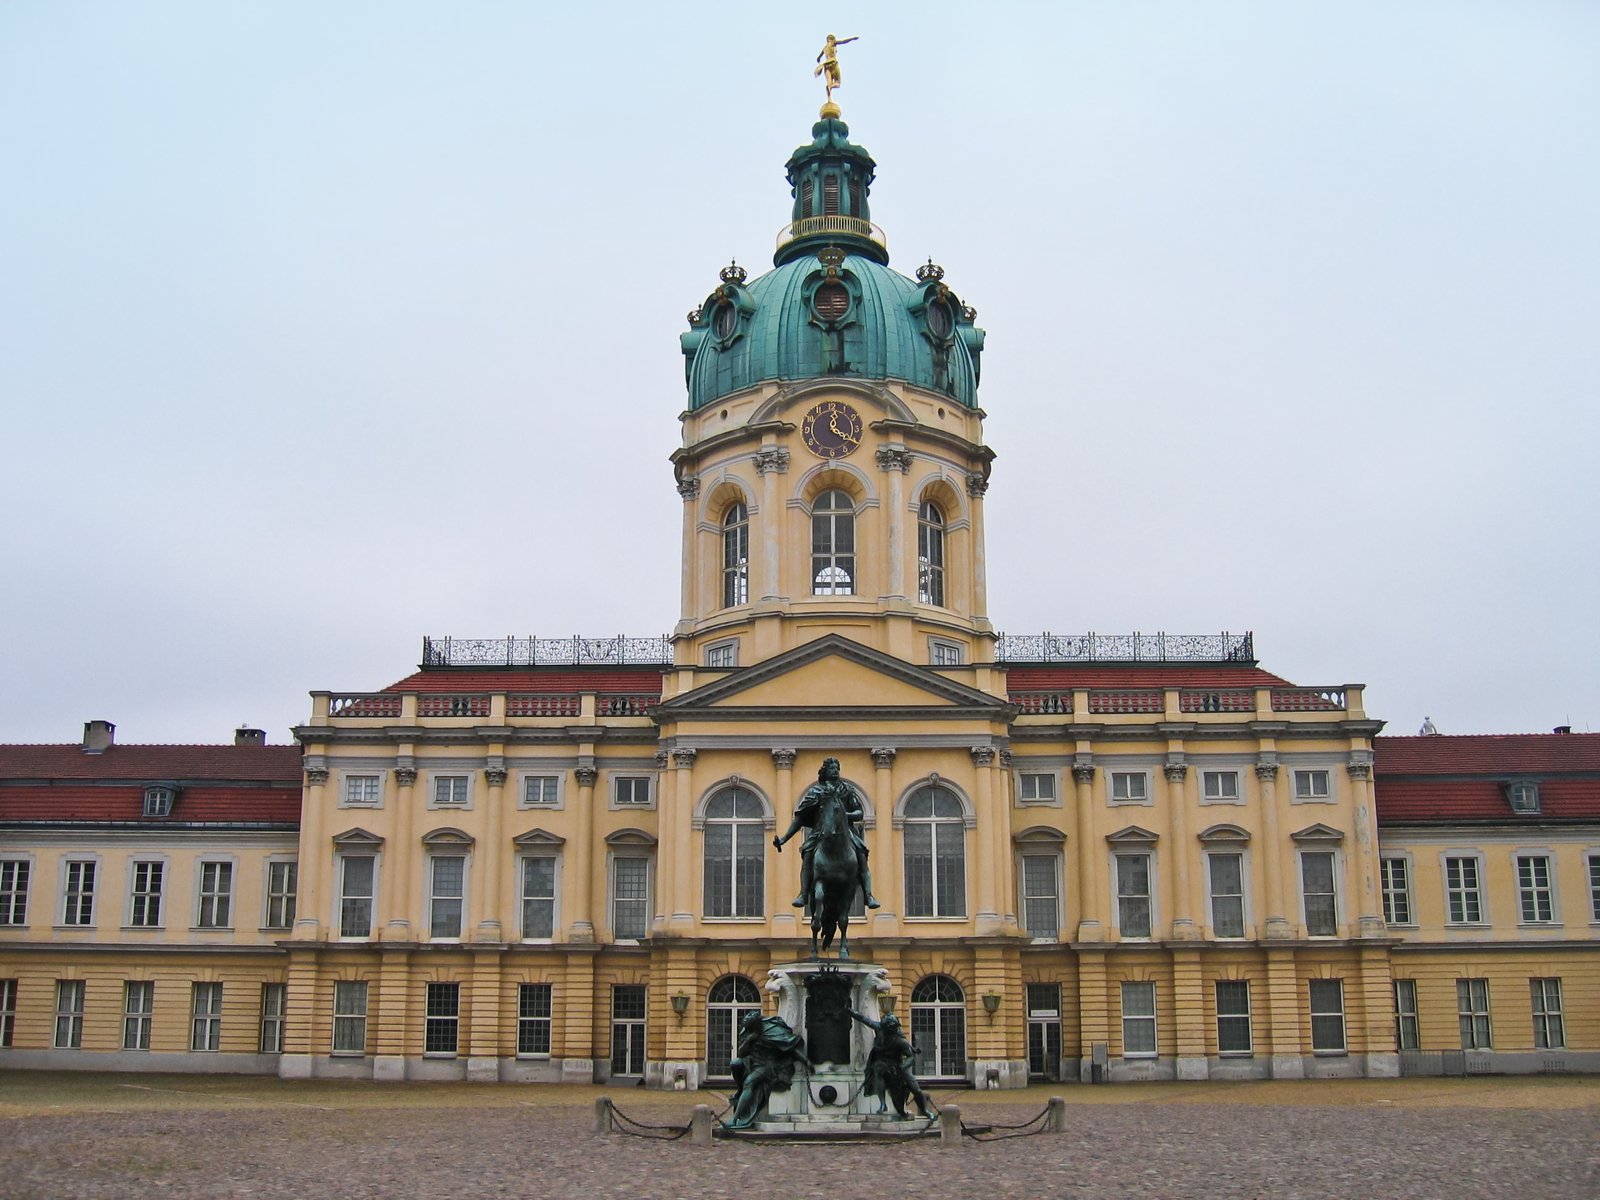 a statue sits in the courtyard next to an ornate building